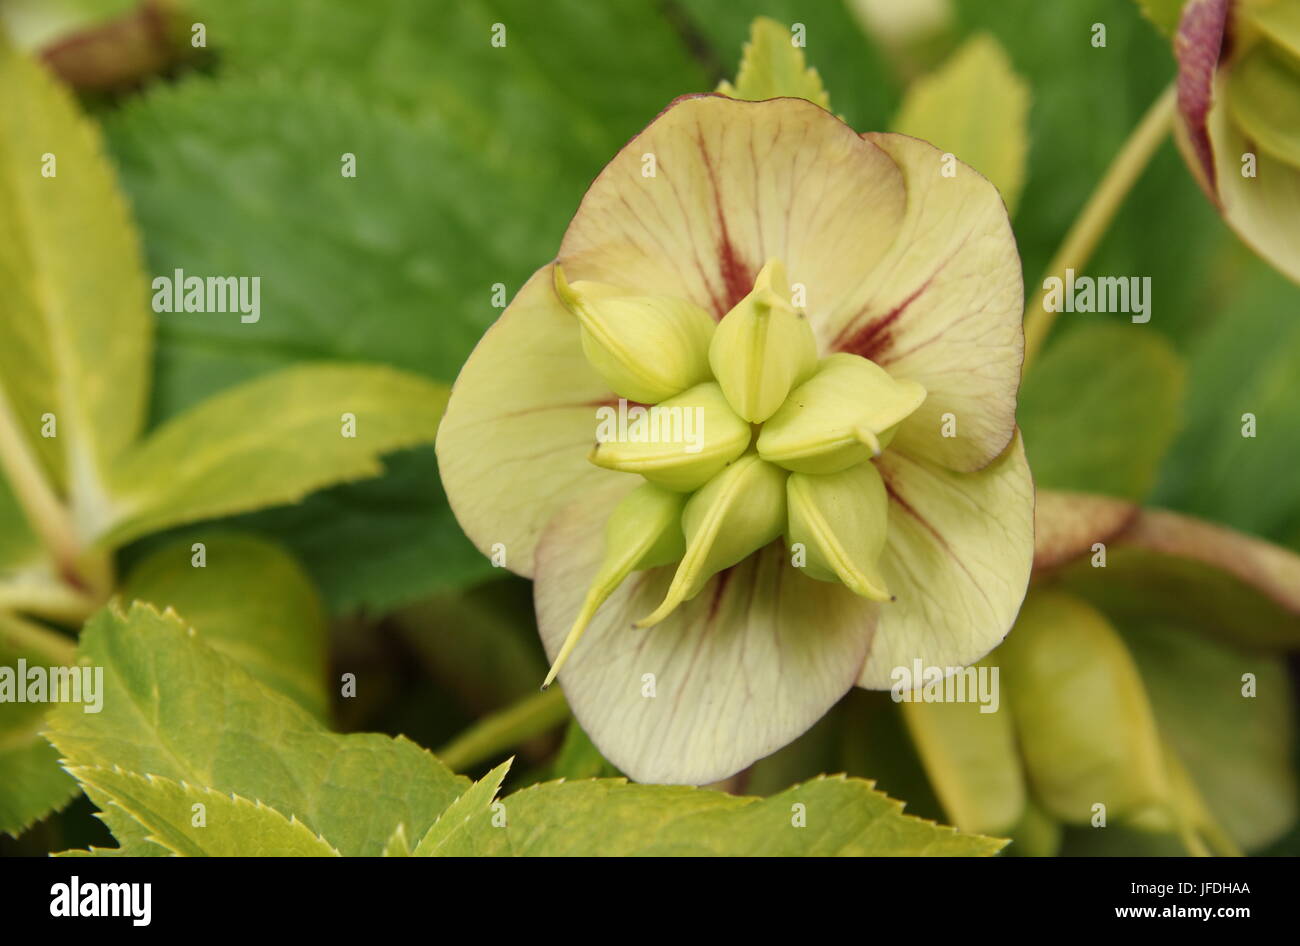 Helleborus 'Neon Star, flower in an advancing stage showing seedhead development, in an English garden - April Stock Photo